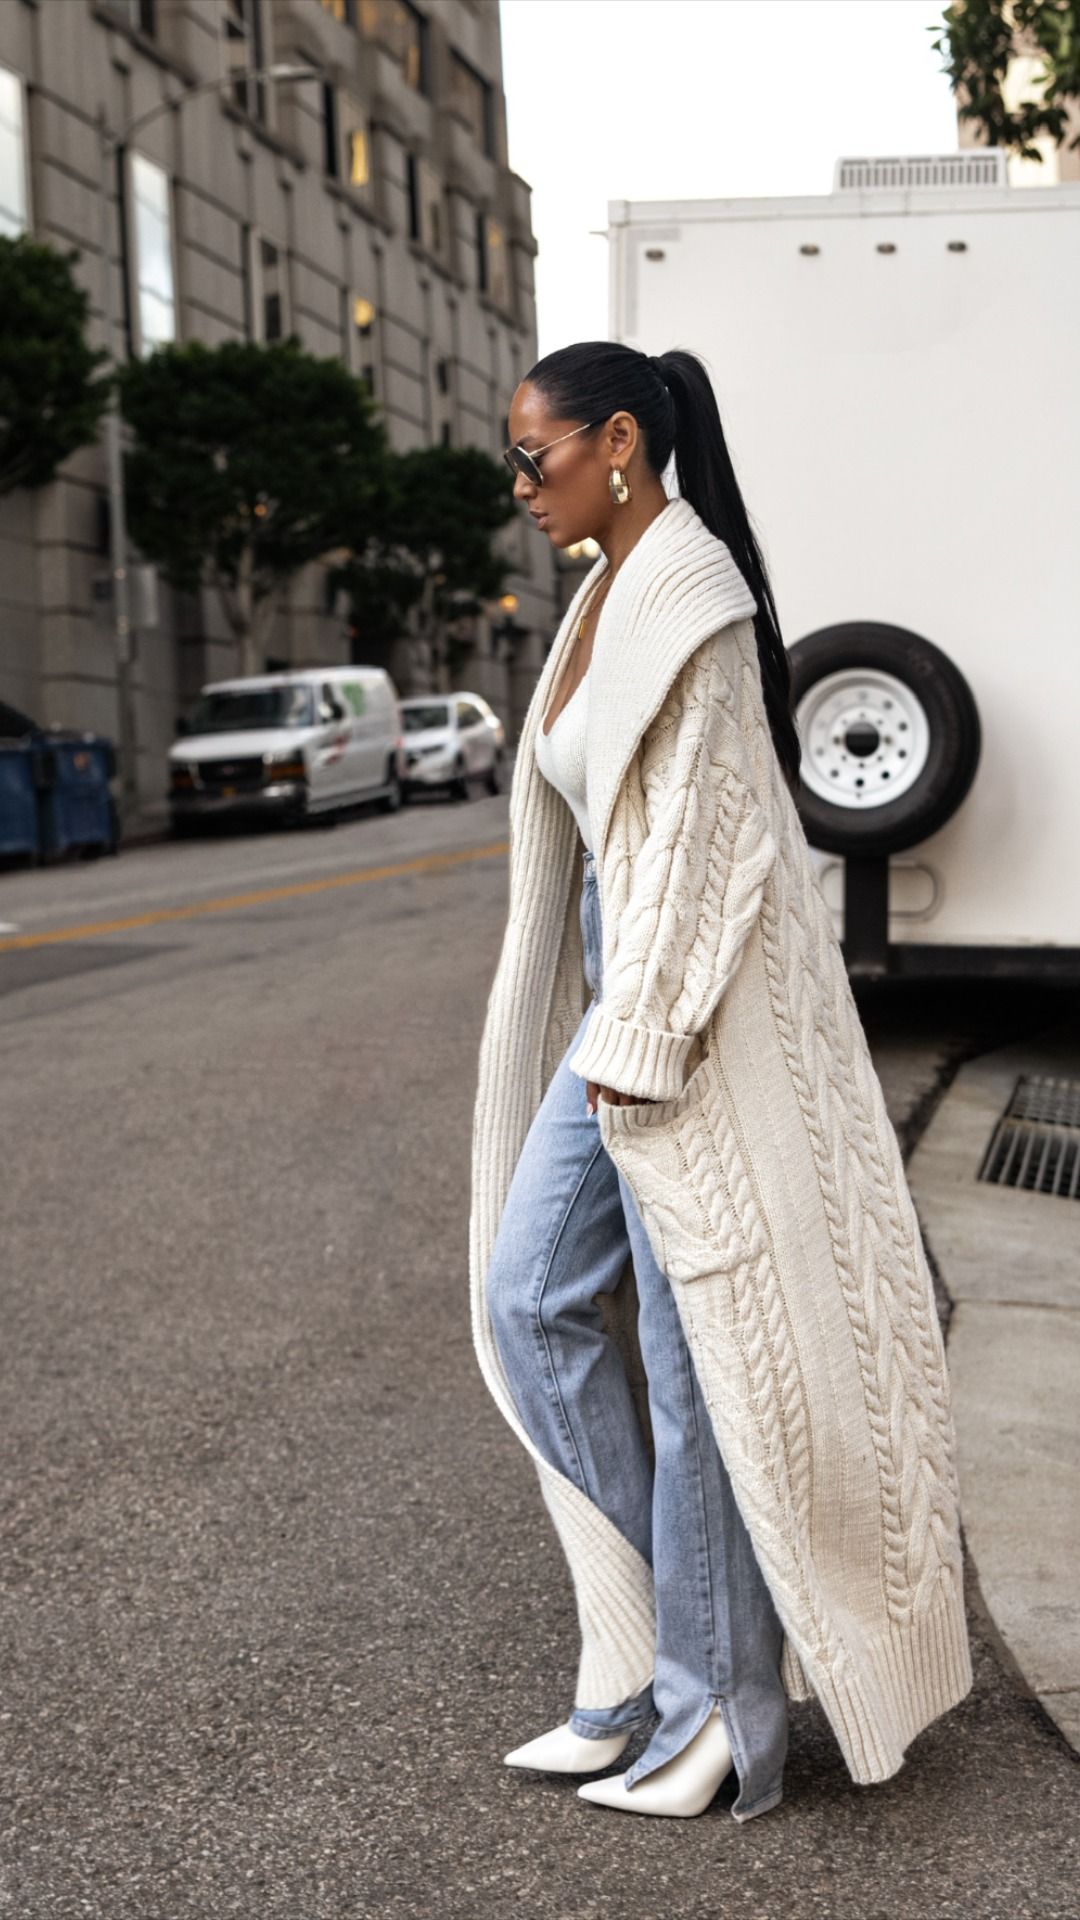 How to Wear Shawl Collar Cardigan: Best 13 Cozy Outfit Ideas for Ladies